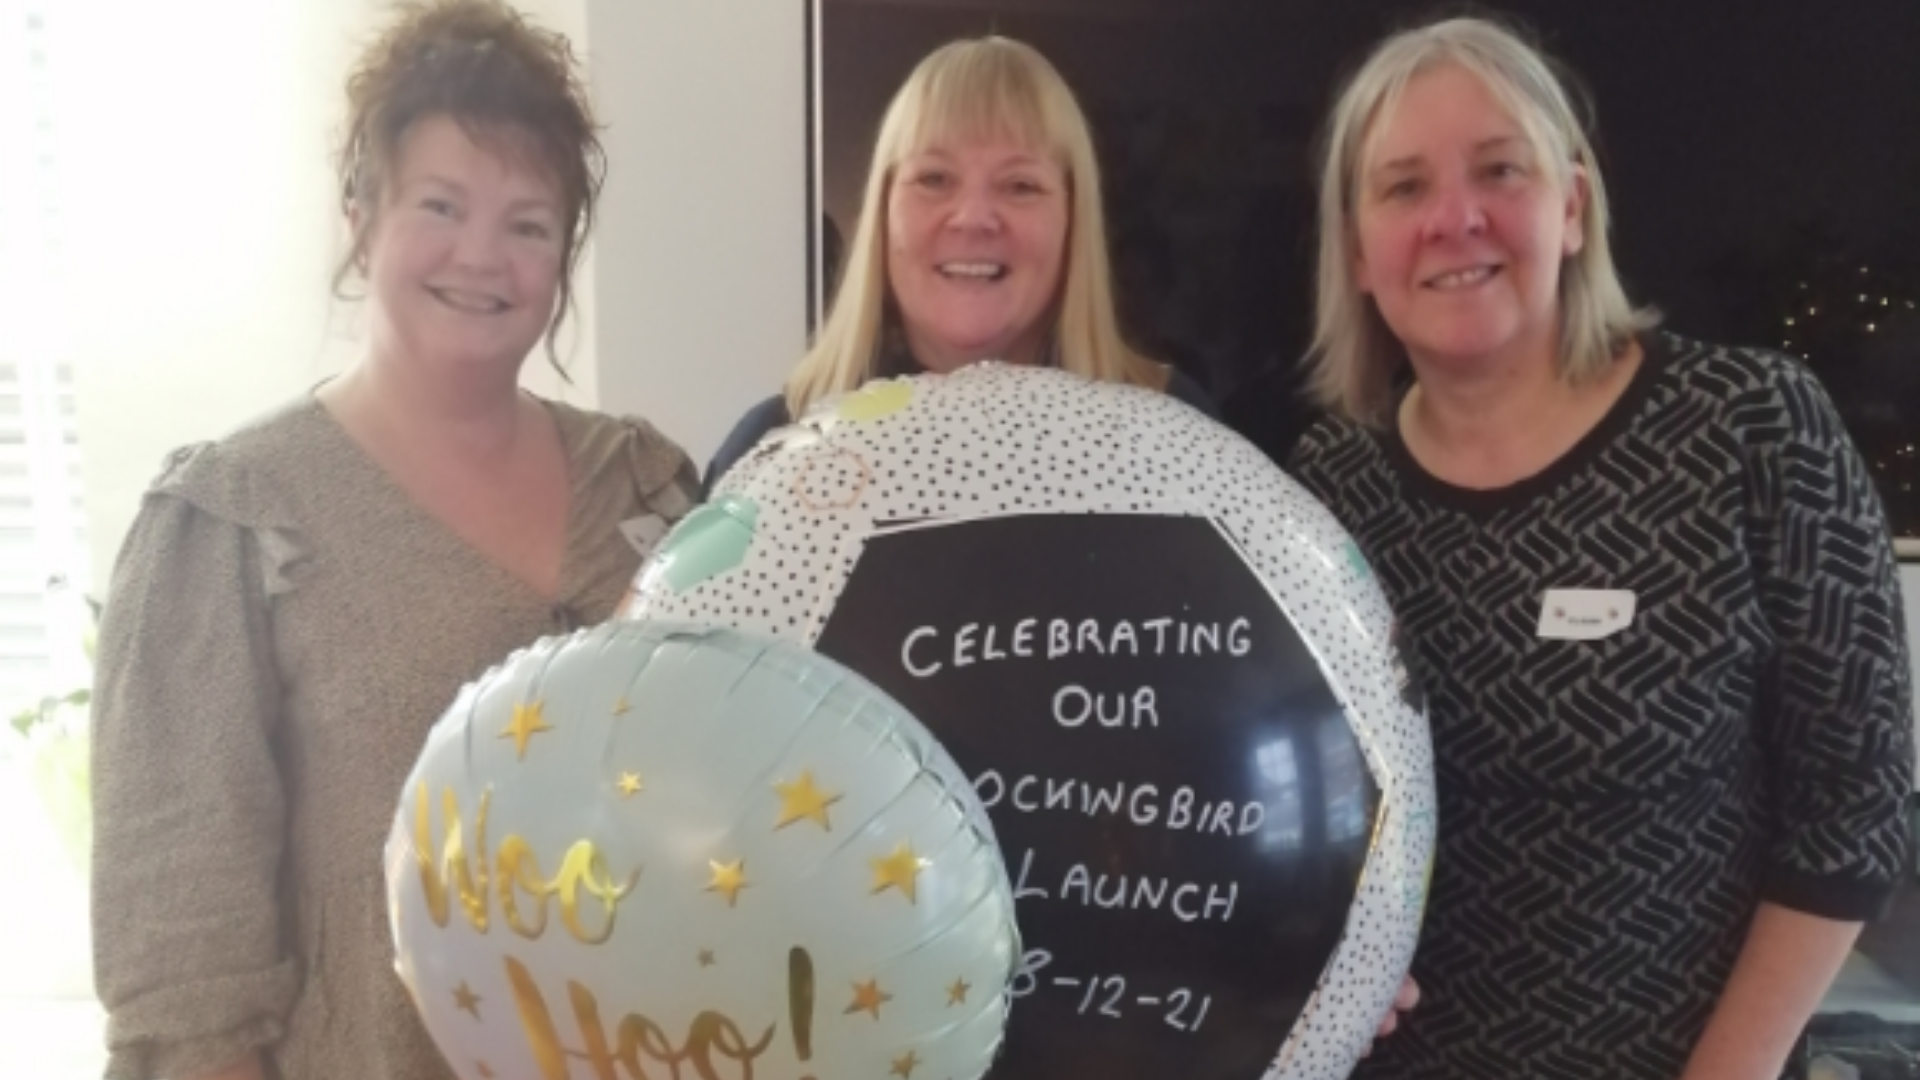 Stockport launches third pioneering fostering family constellation